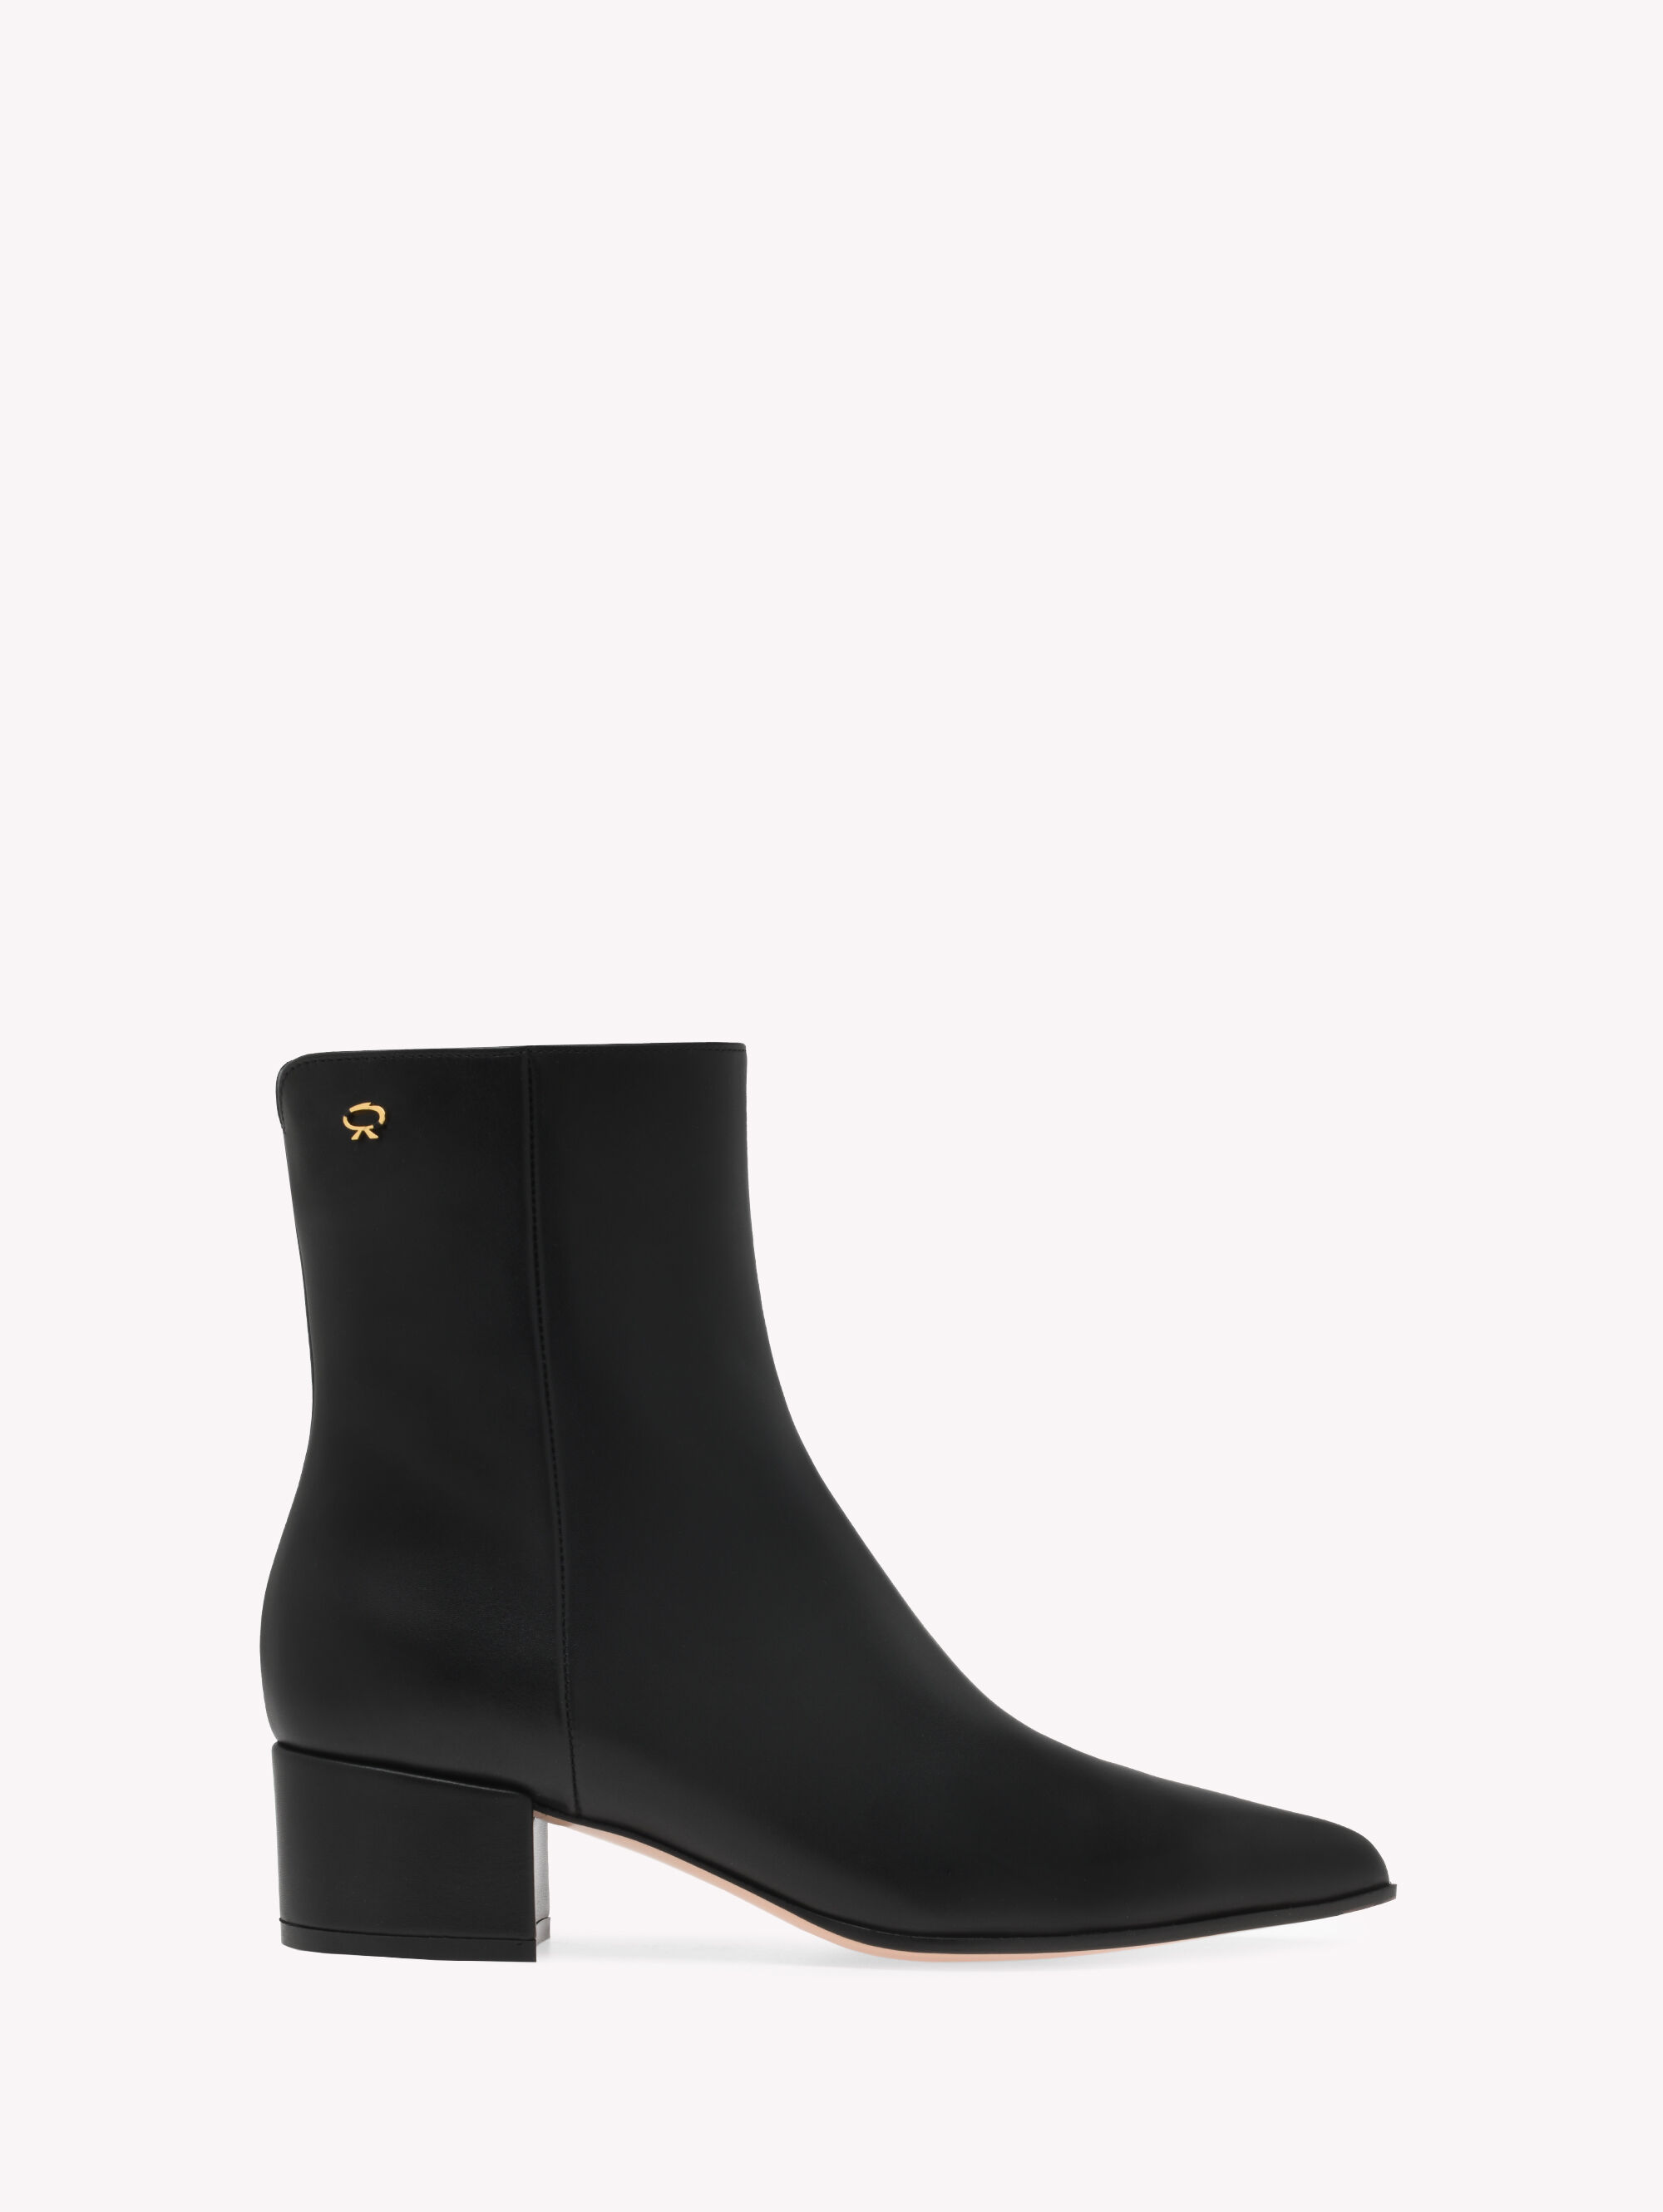 SARA Black Patent Leather Ankle Boots | Patent Leather Flat Boots